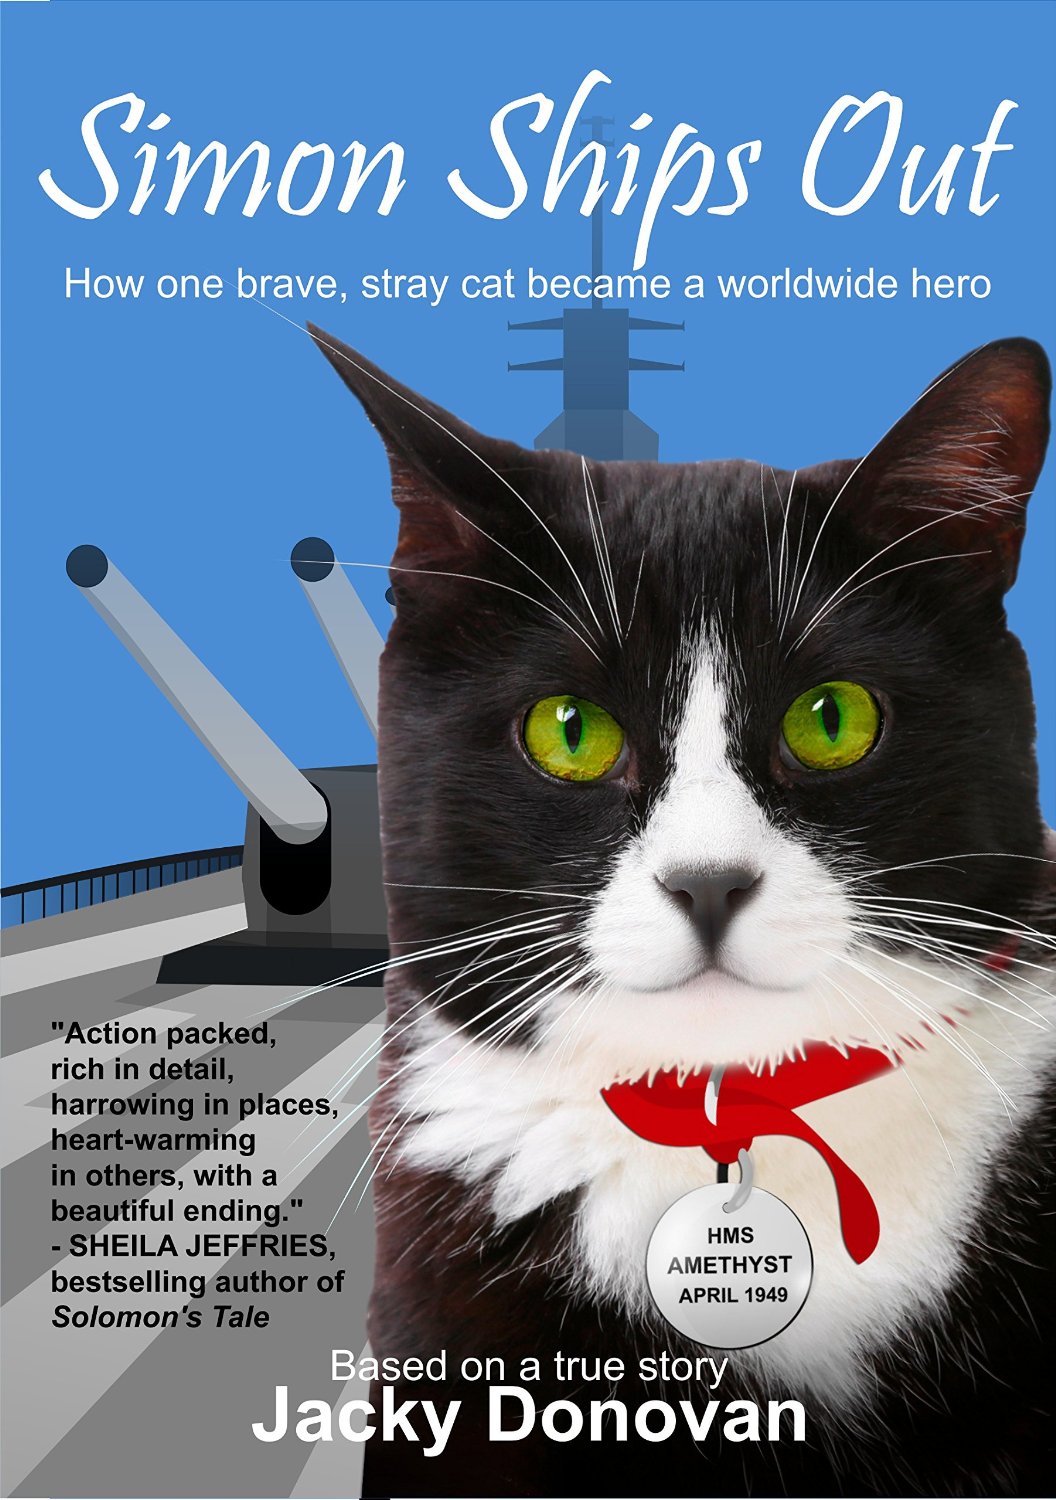 Simon Ships Out. How one brave, stray cat became a worldwide hero: Based on a true story by Jacky Donovan